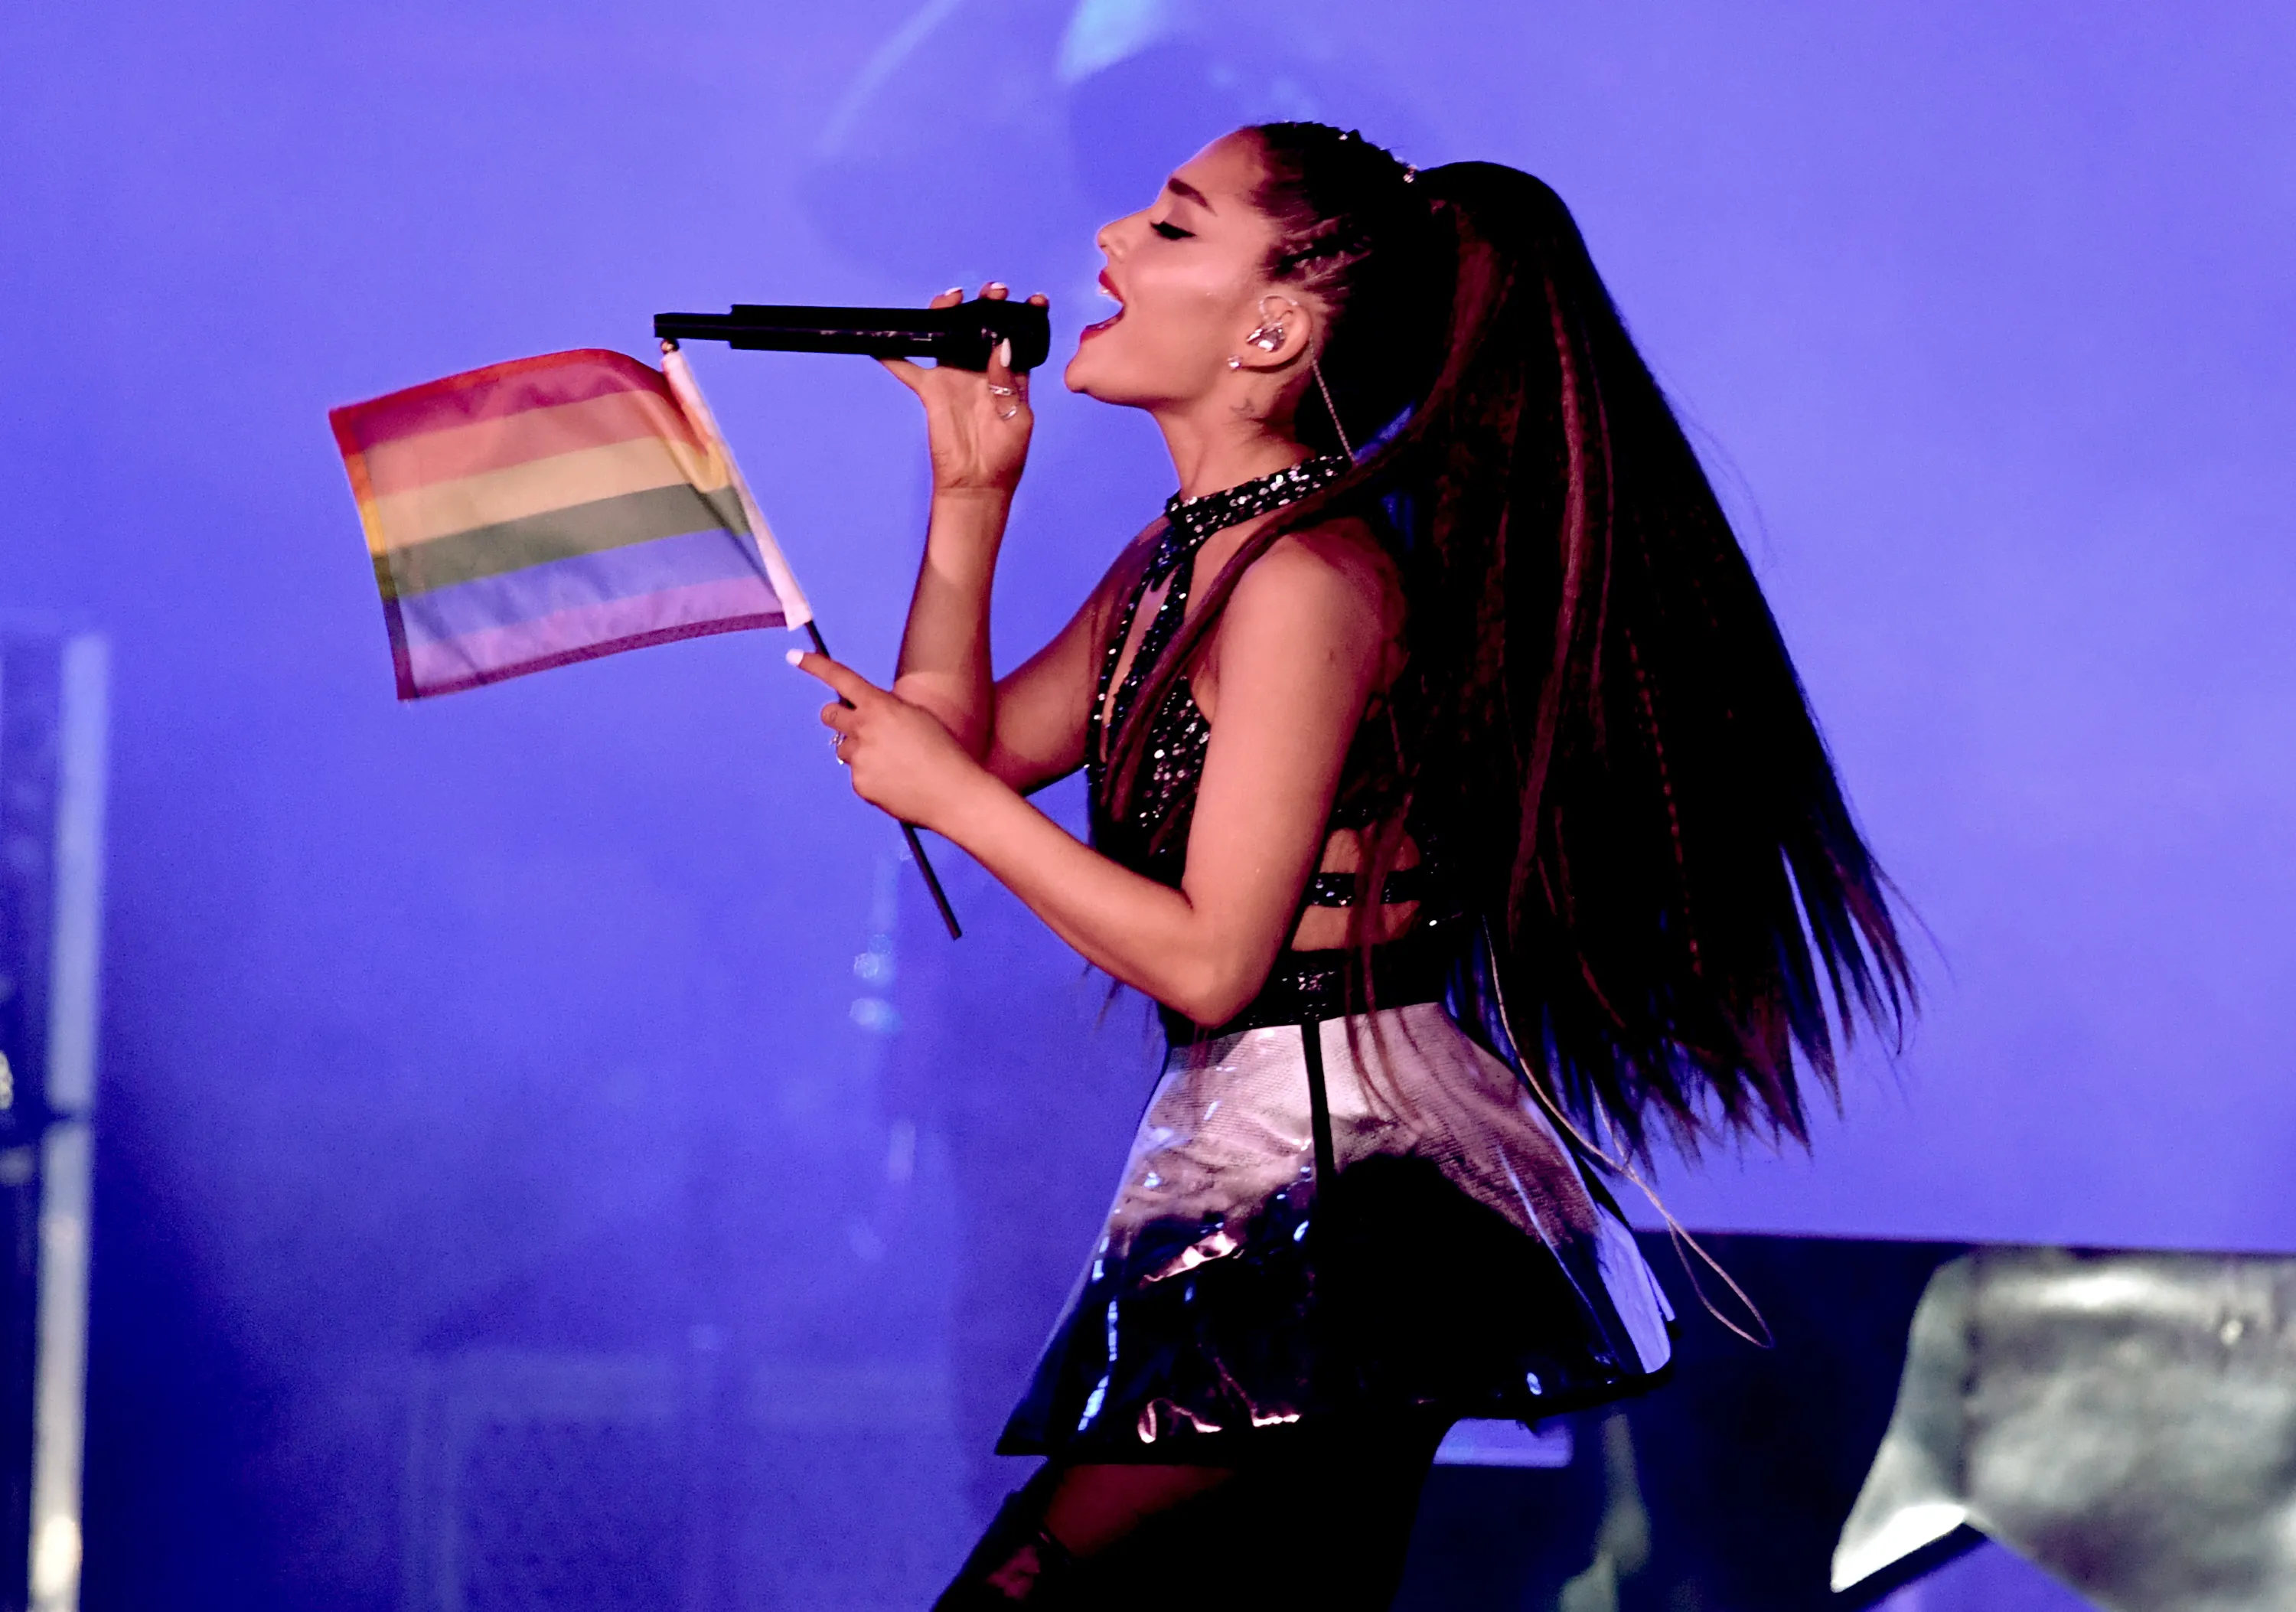 achy suarsih recommends ariana grande lesbian sex pic